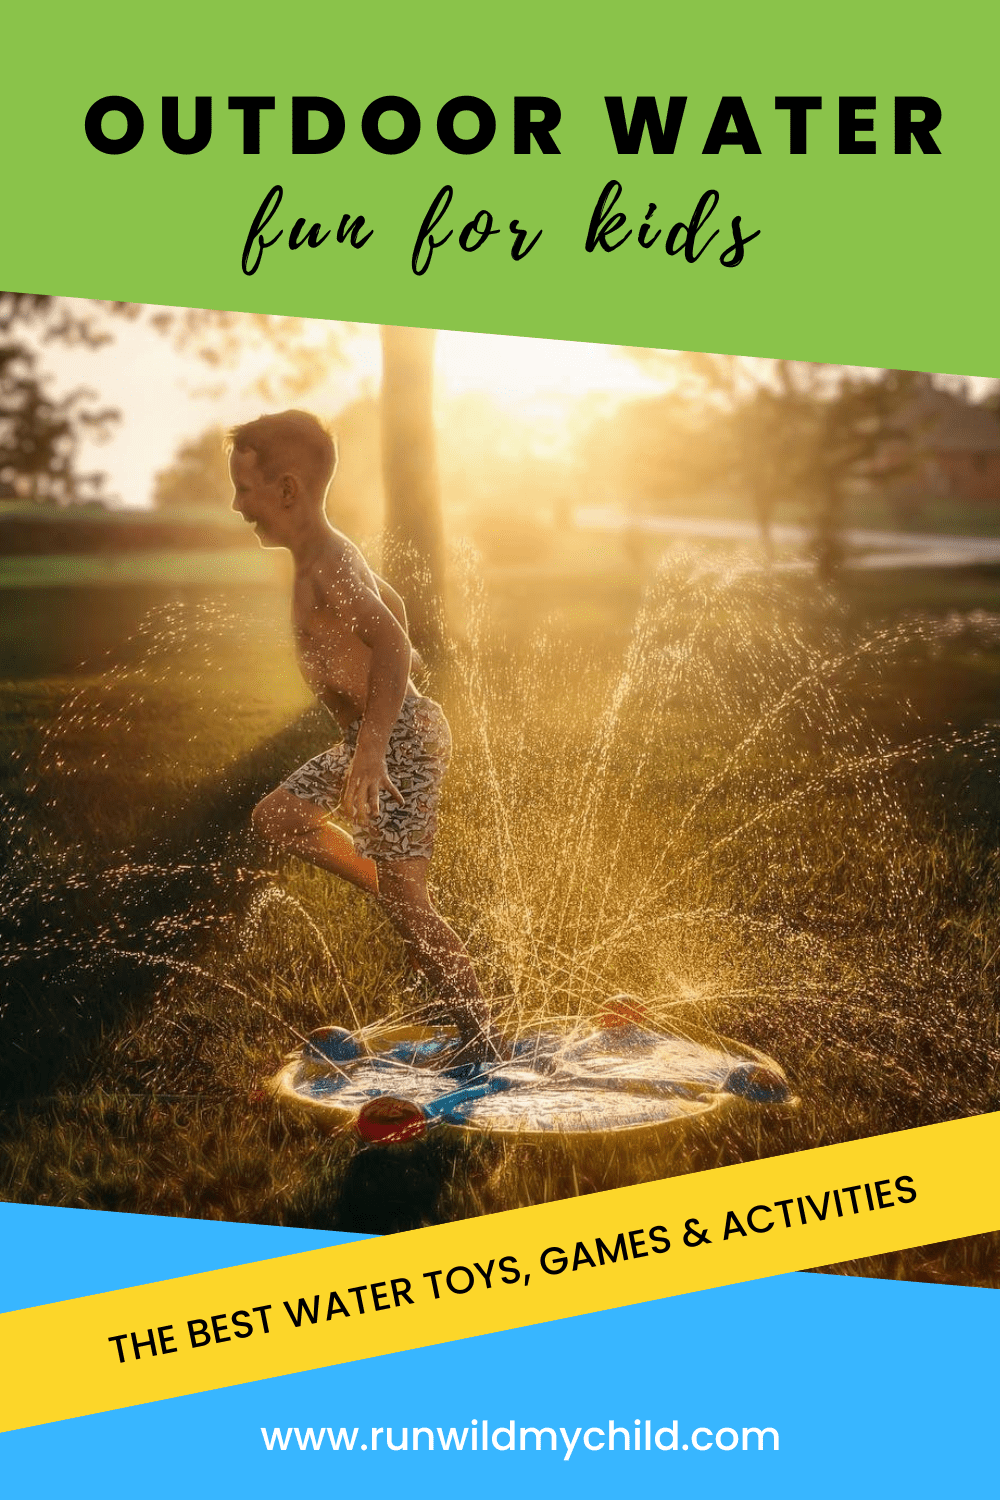 Outdoor Water Fun for Kids - The best water toys, water games, and water activities for kids